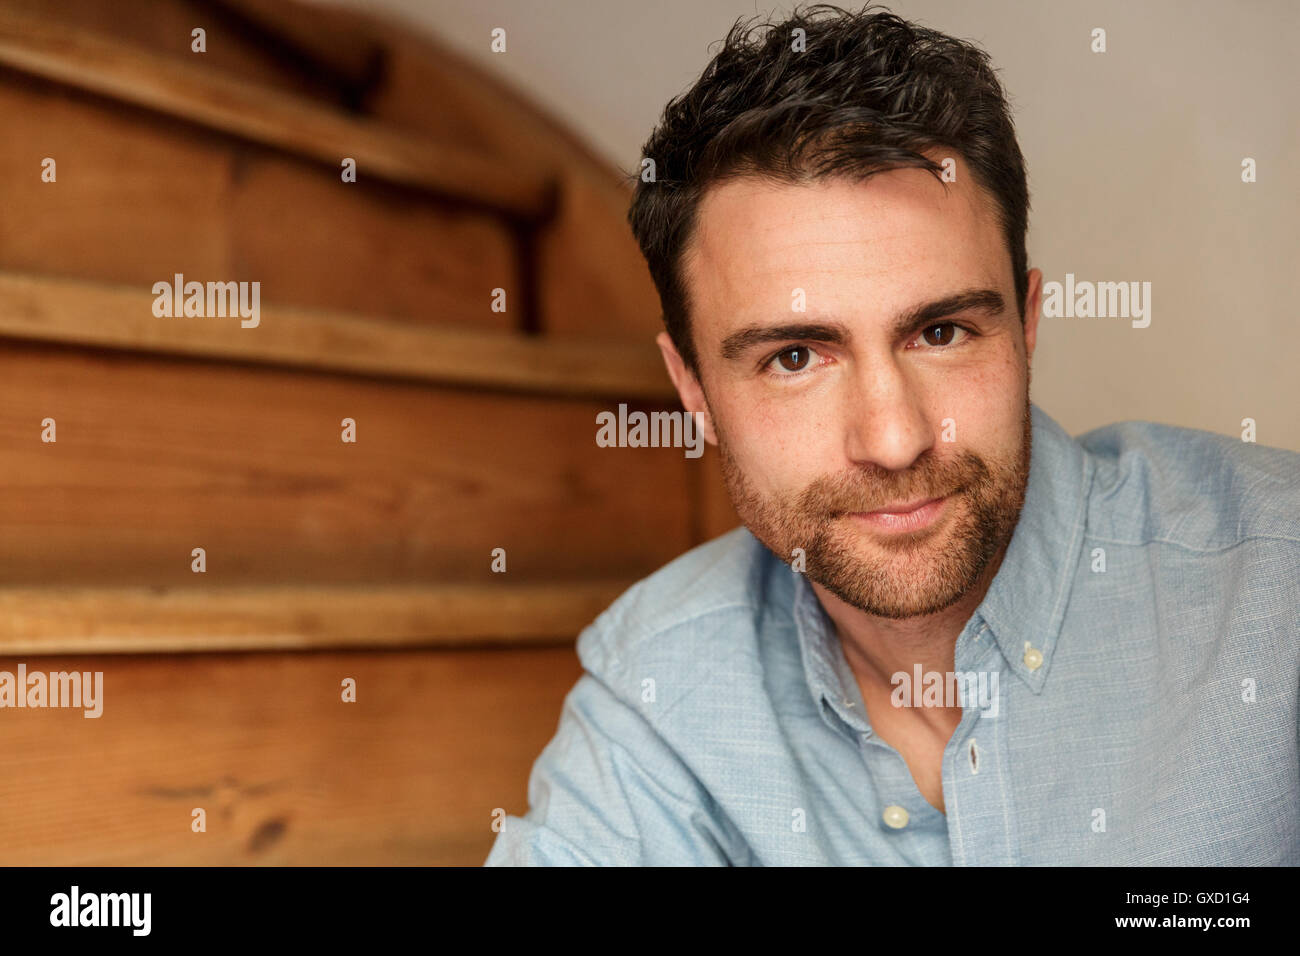 Portrait of man with stubble on stairway looking at camera Stock Photo